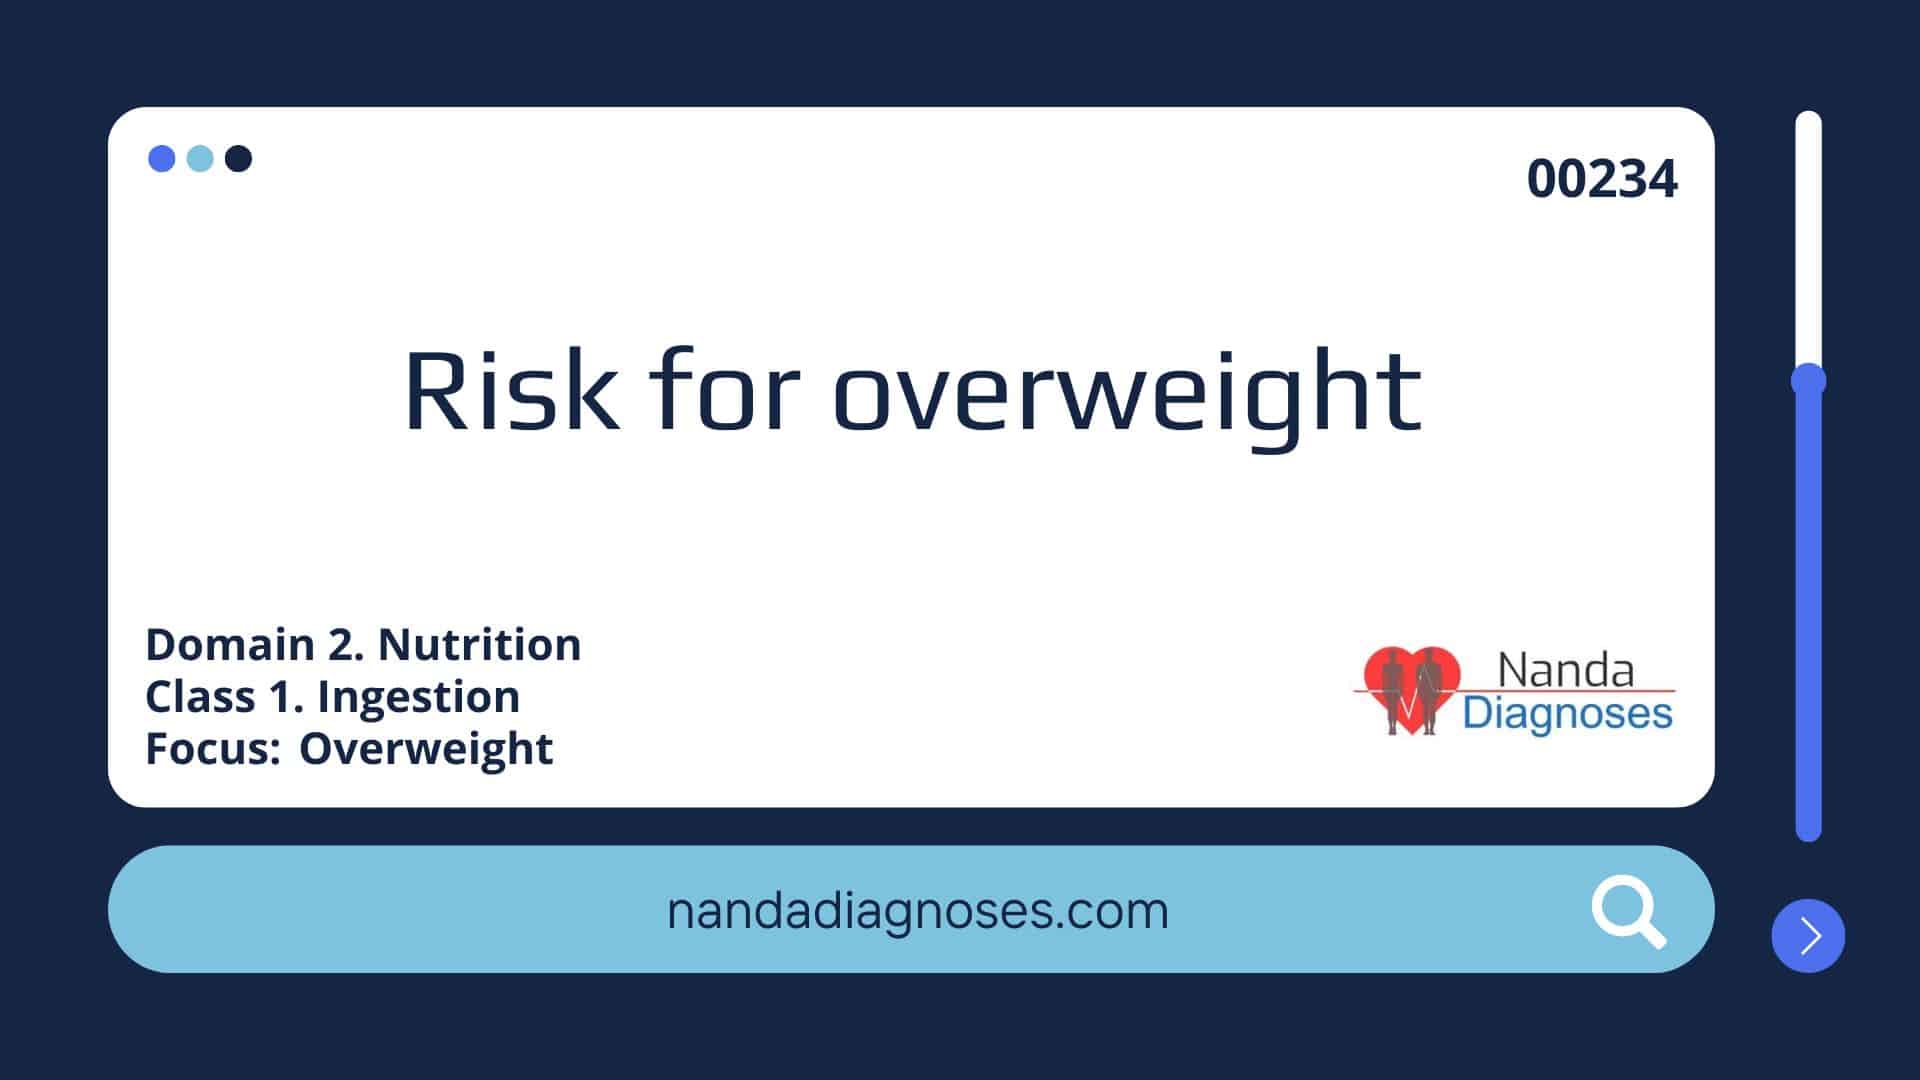 Nursing diagnosis Risk for overweight